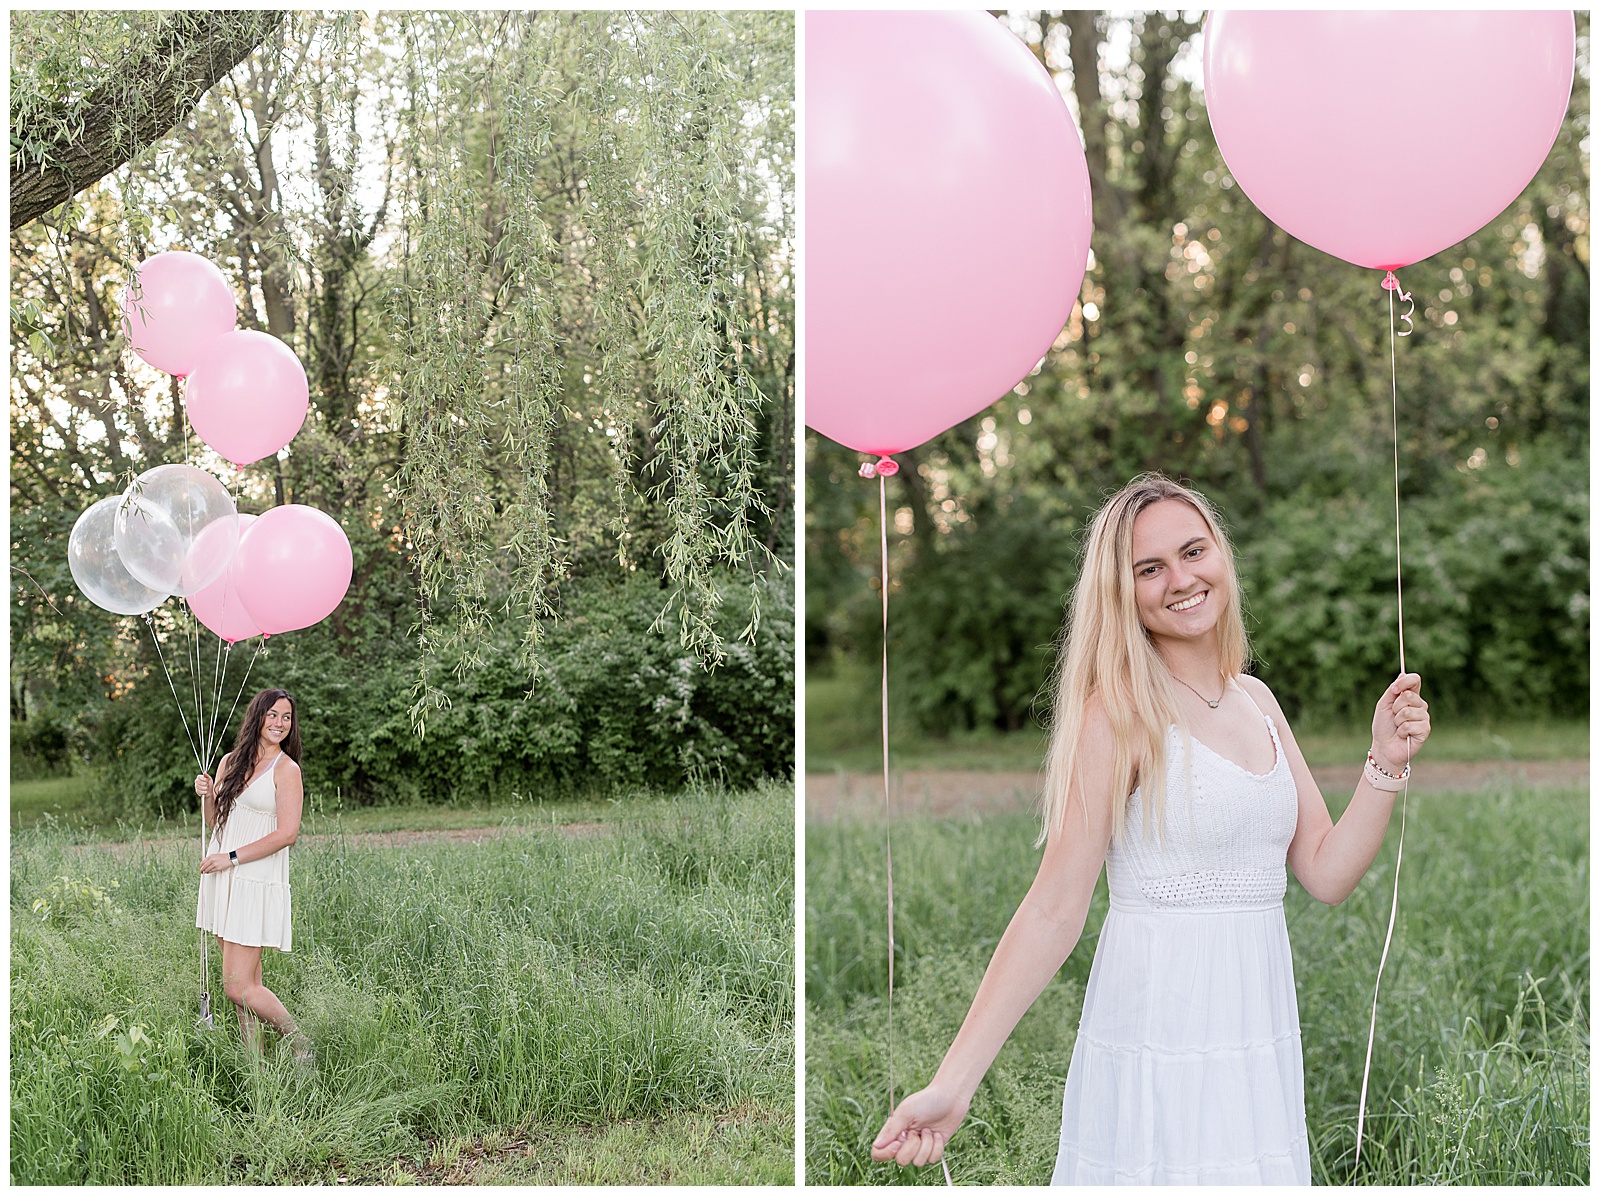 senior spokesmodels in white dresses holding extra large balloons in grassy field by trees in lancaster pennsylvania